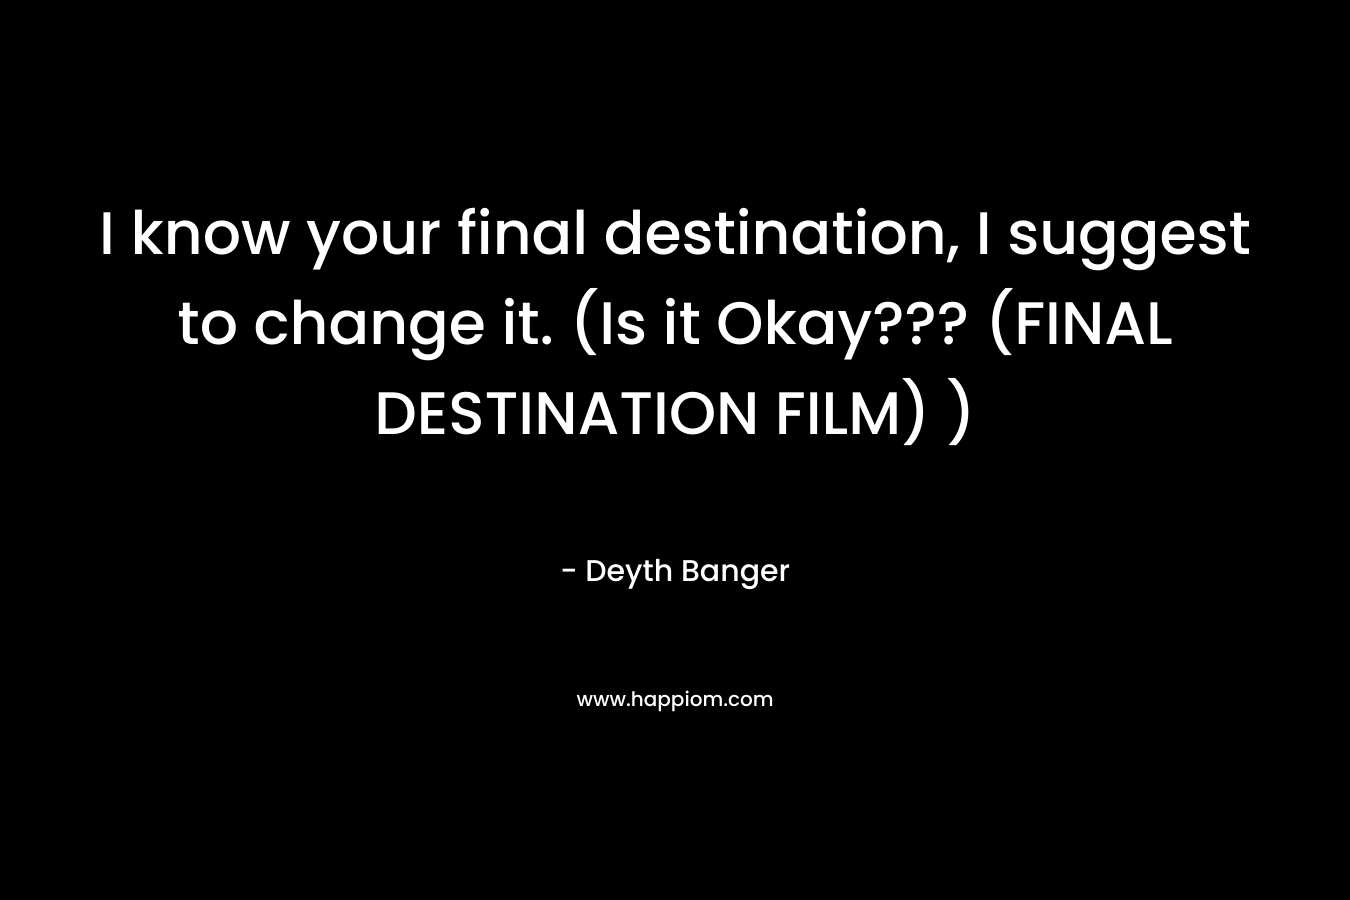 I know your final destination, I suggest to change it. (Is it Okay??? (FINAL DESTINATION FILM) )